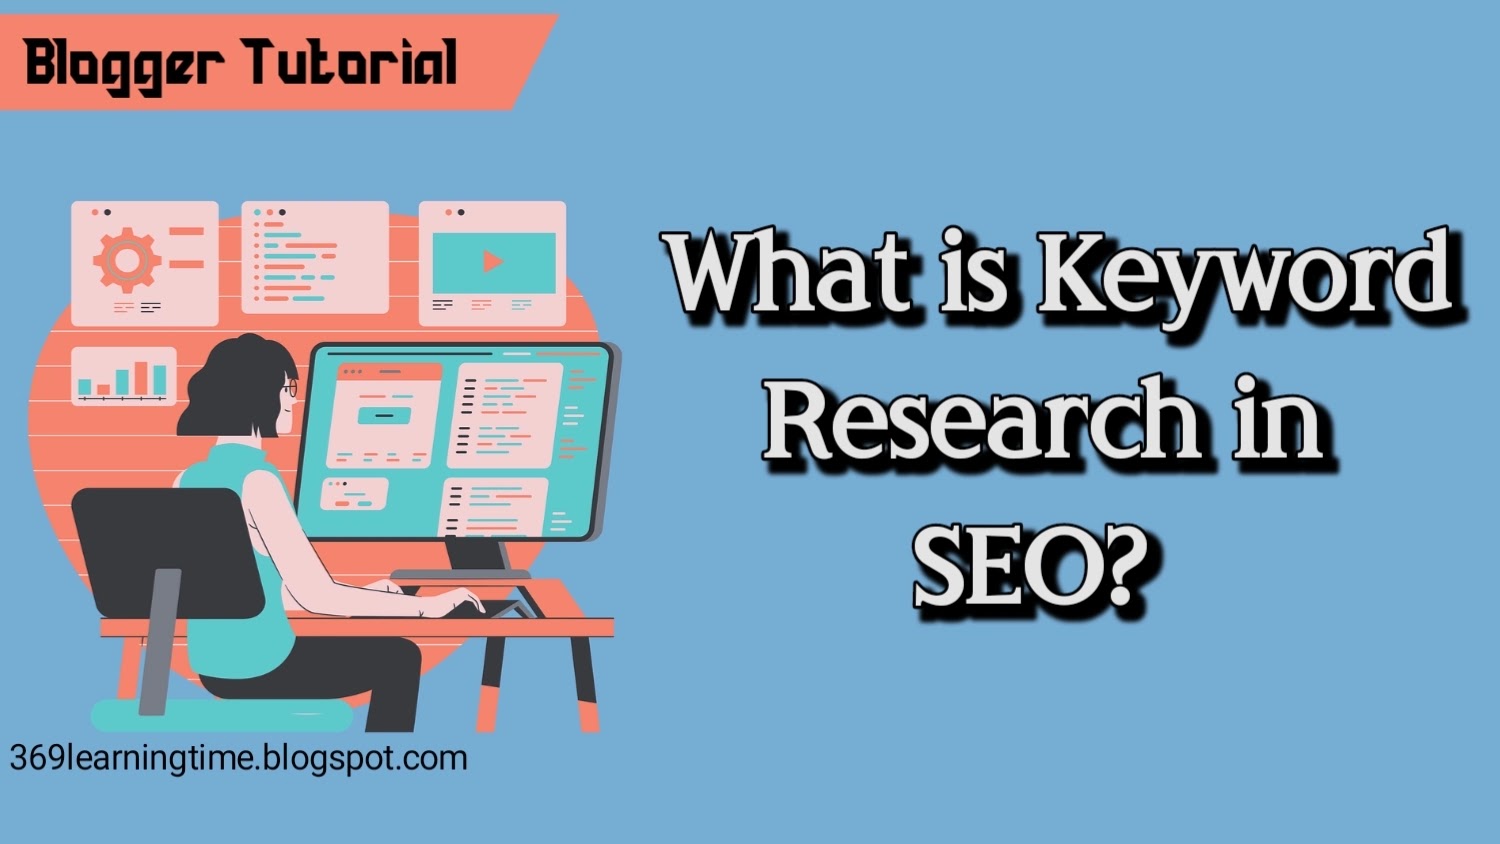 What is Keyword Research in SEO